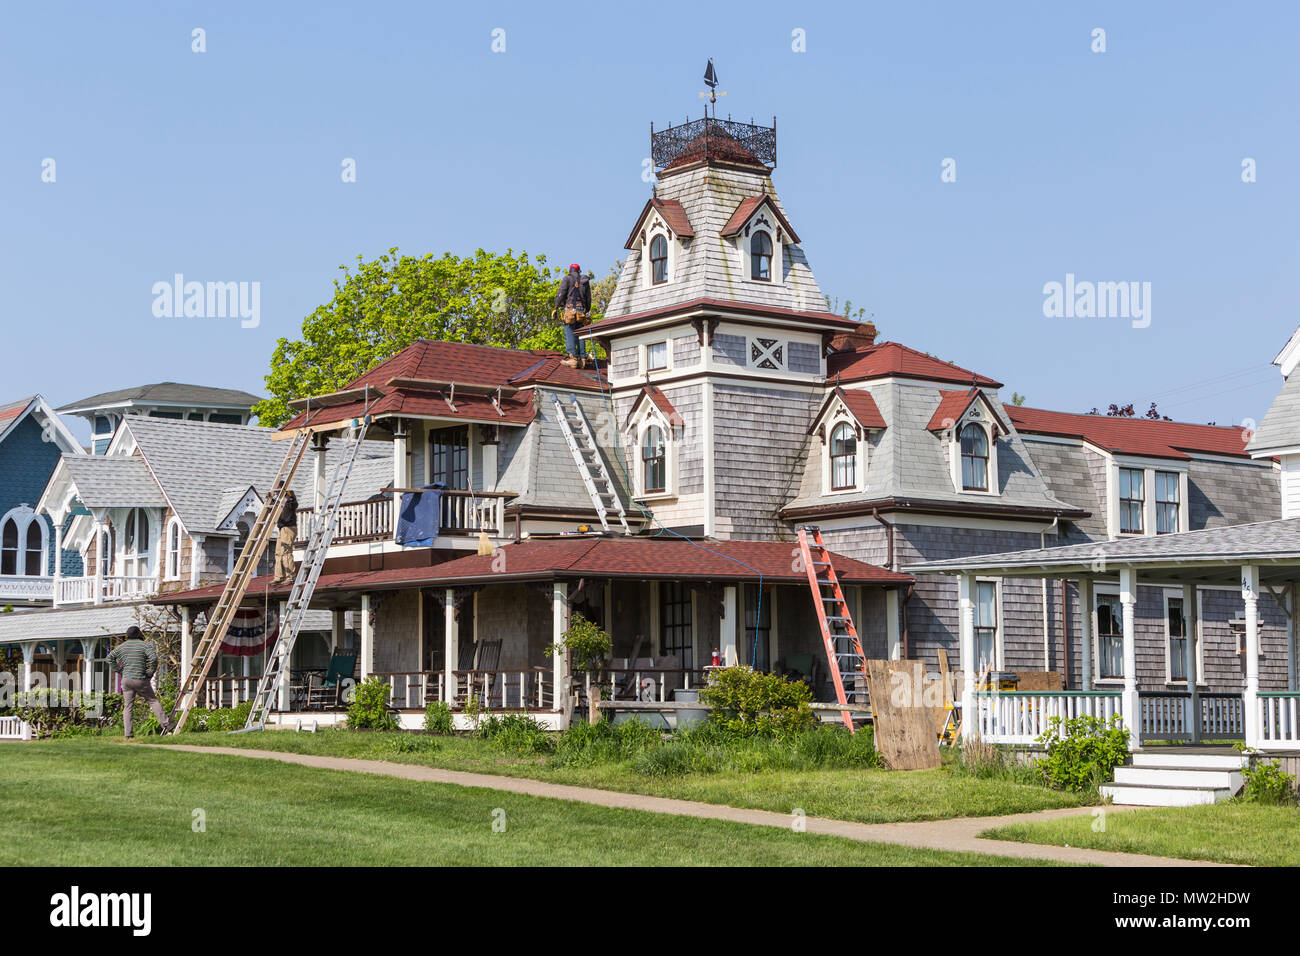 Workers make spring roof repairs to a Victorian era home on Ocean Avenue in Oak Bluffs, Massachusetts on Martha's Vineyard. Stock Photo